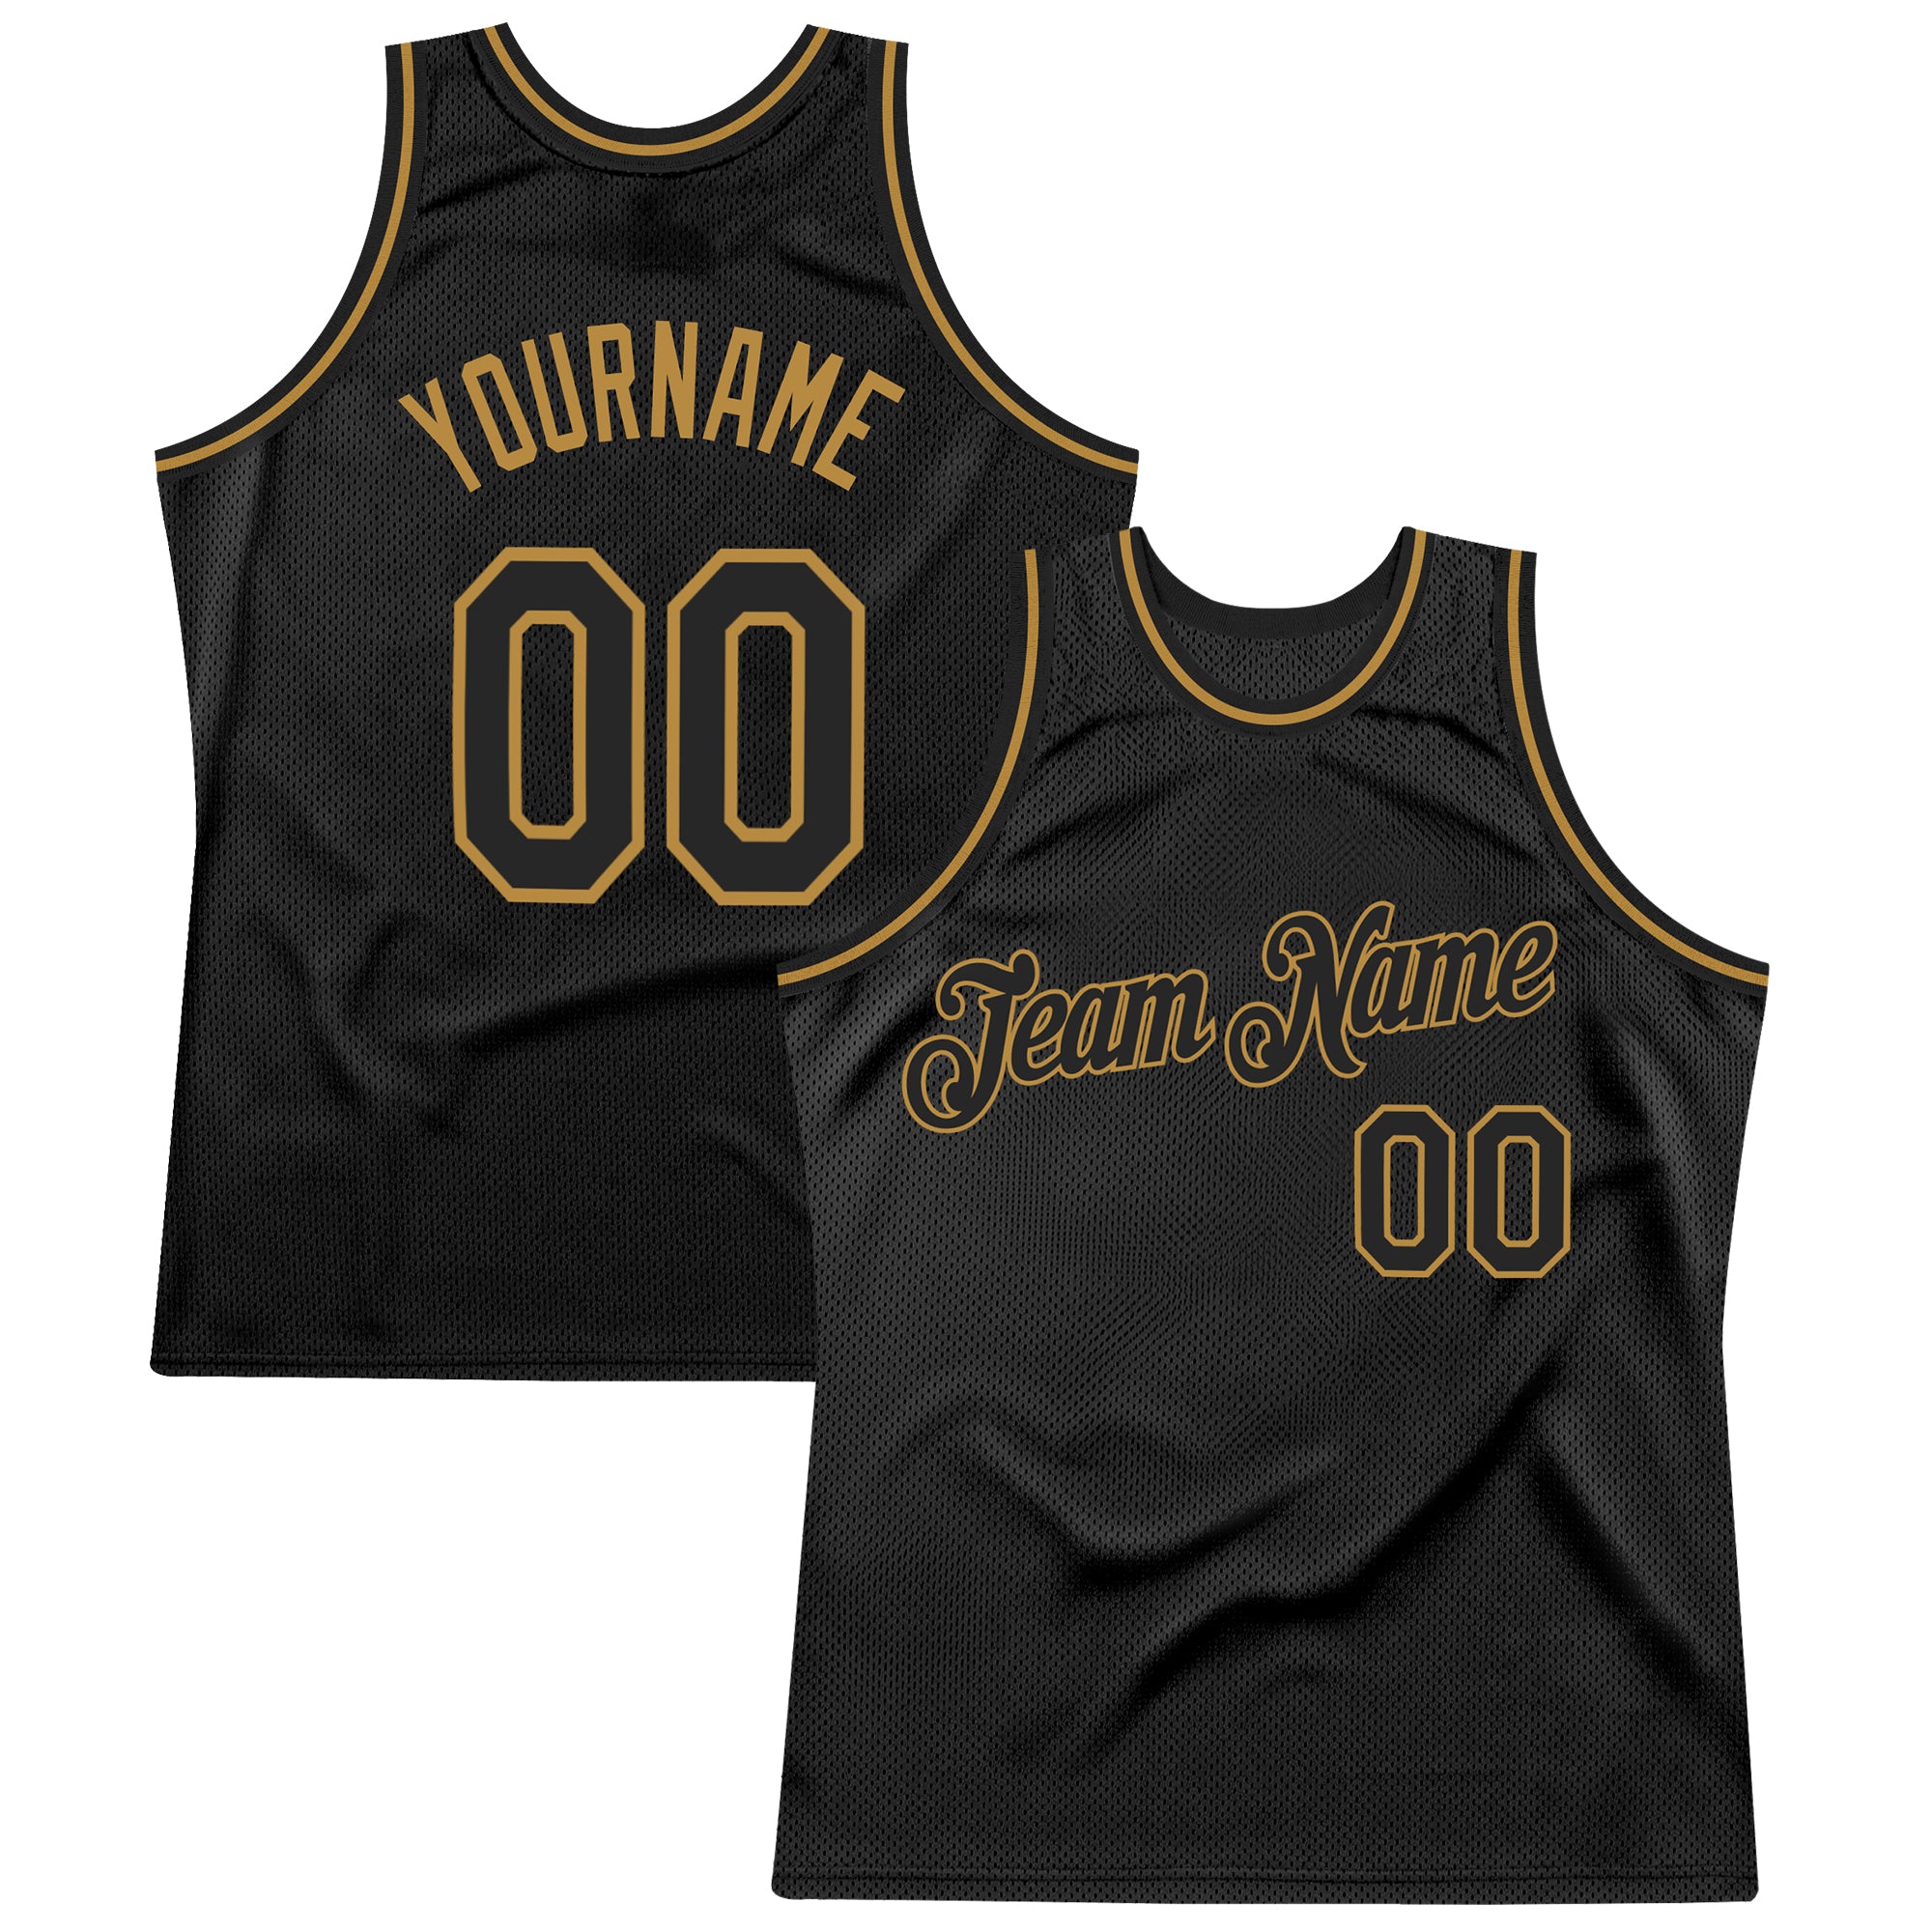 NBA Throwback Jersey Gift Guide: 10 items for old-school hoops fans